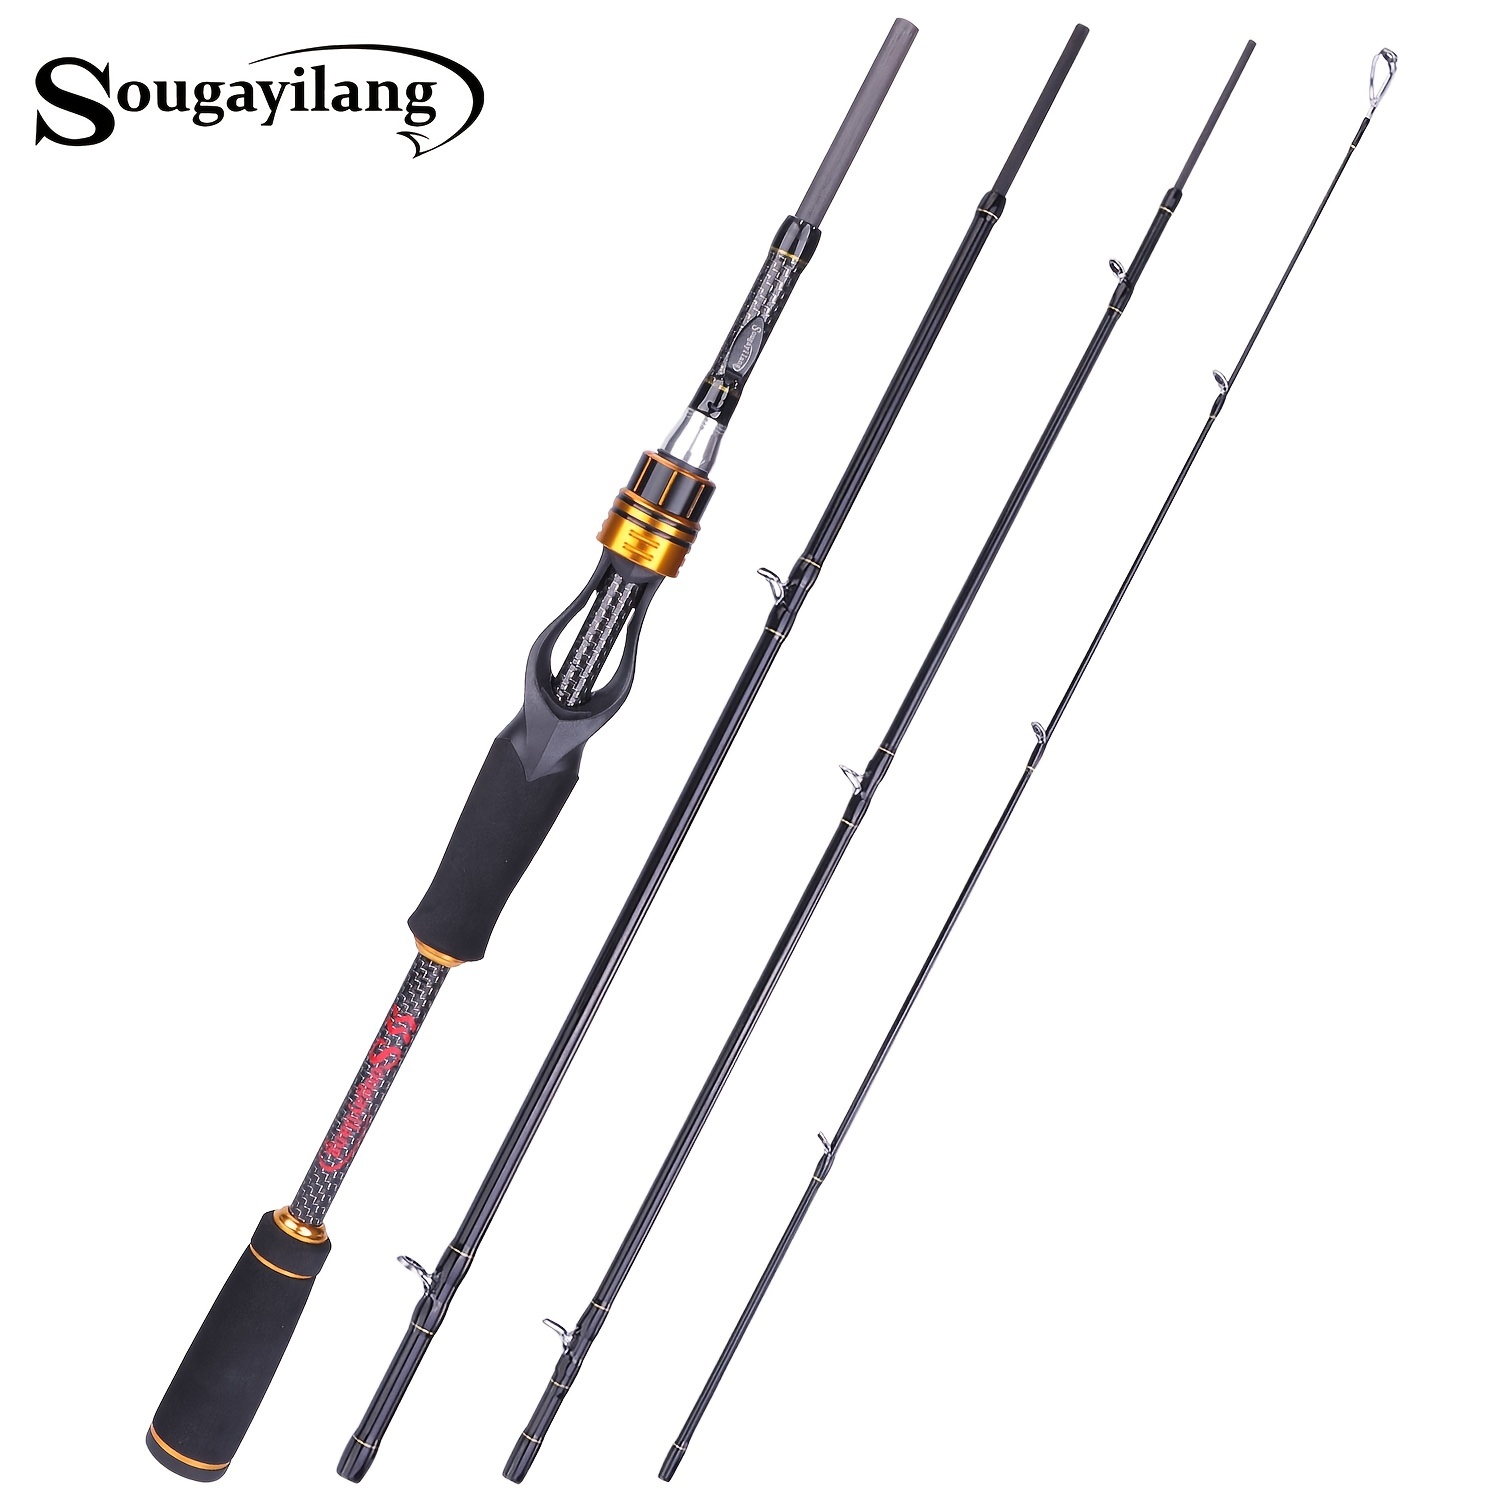 Sougayilang Portable 4 Section Casting Fishing Rod with Serpentine Reel  Seat - Lightweight and Durable for Easy Travel and Optimal Performance